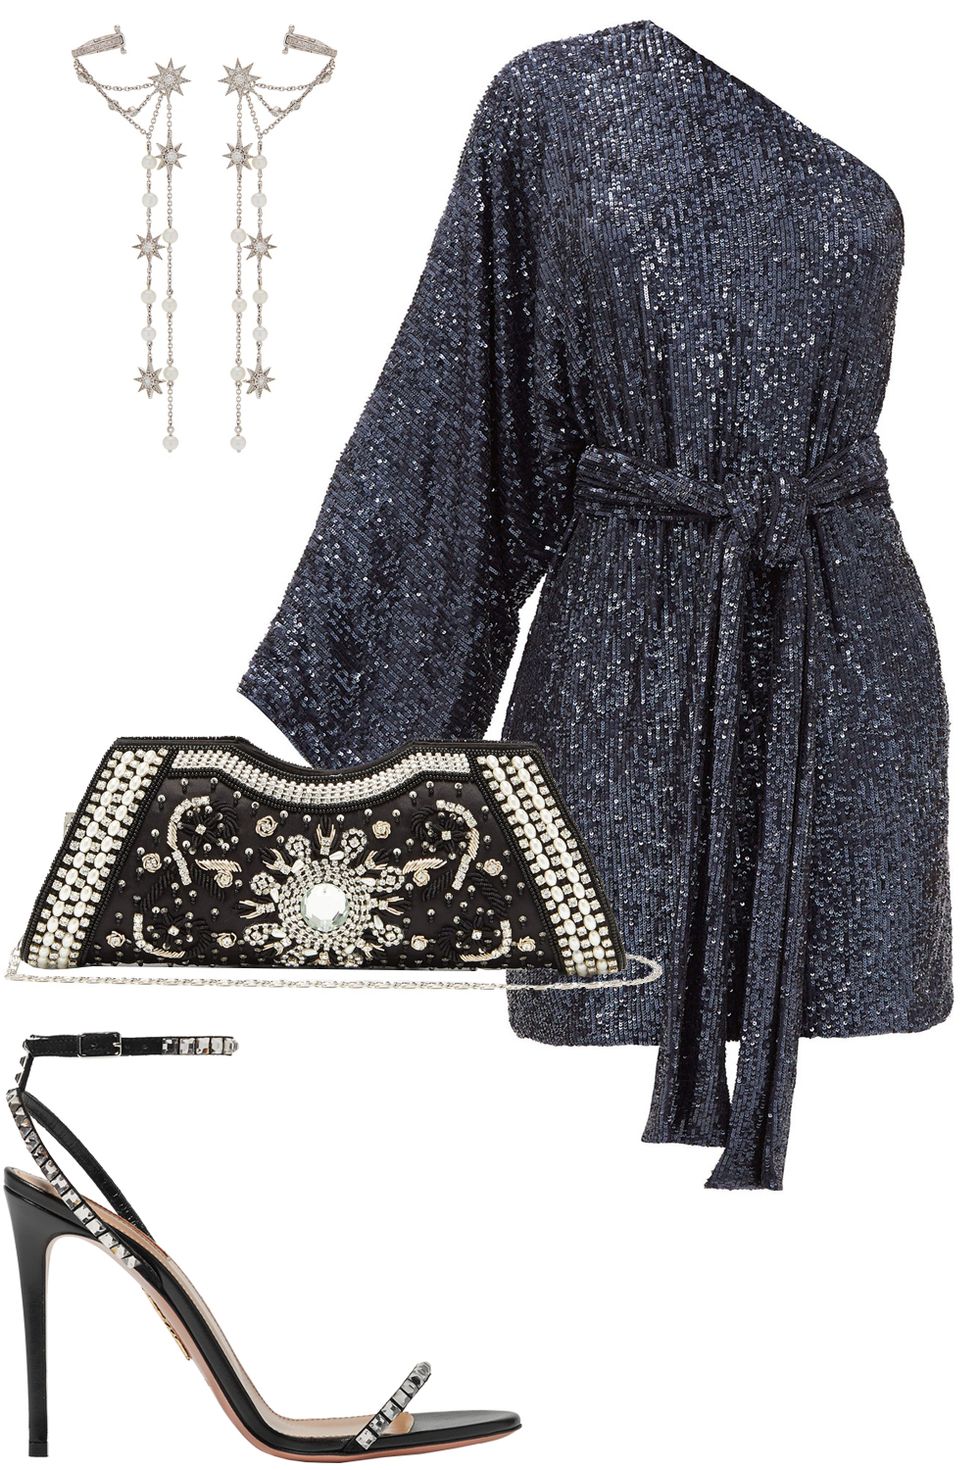 starry night winter wedding guest outfit ideas